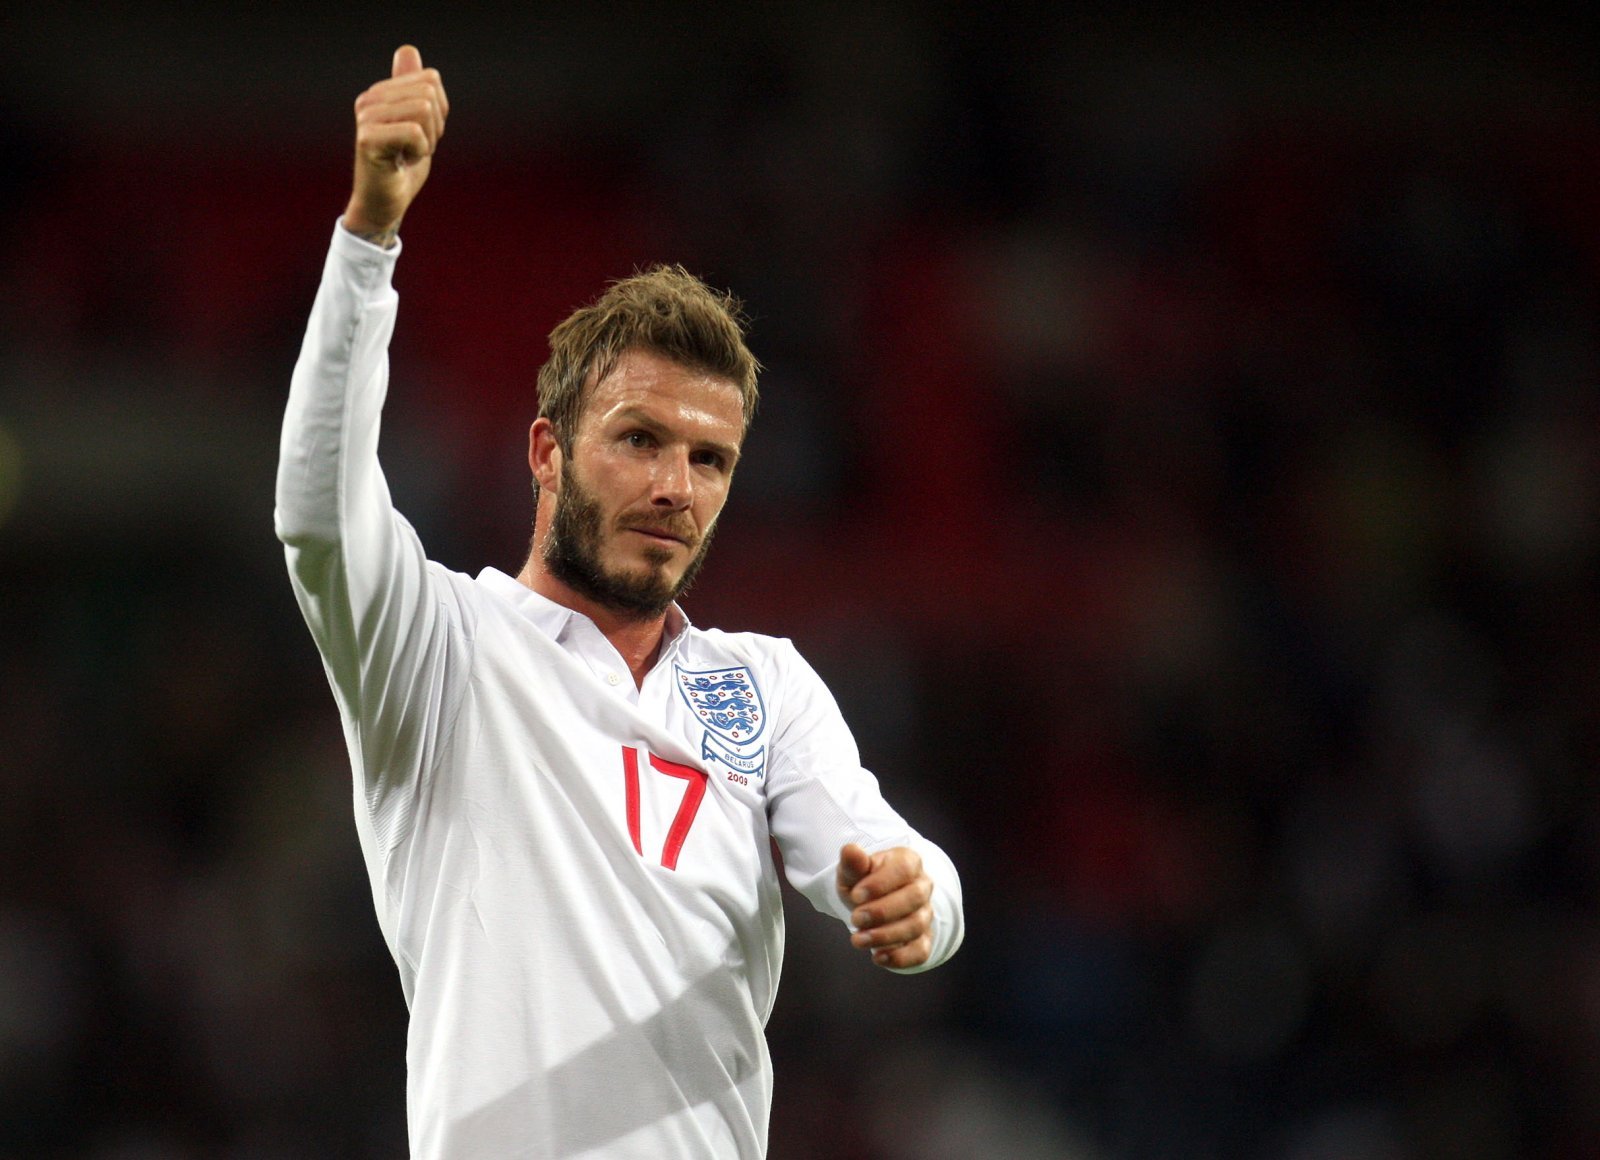 Career in pictures - Manchester United and England legend David Beckham ...